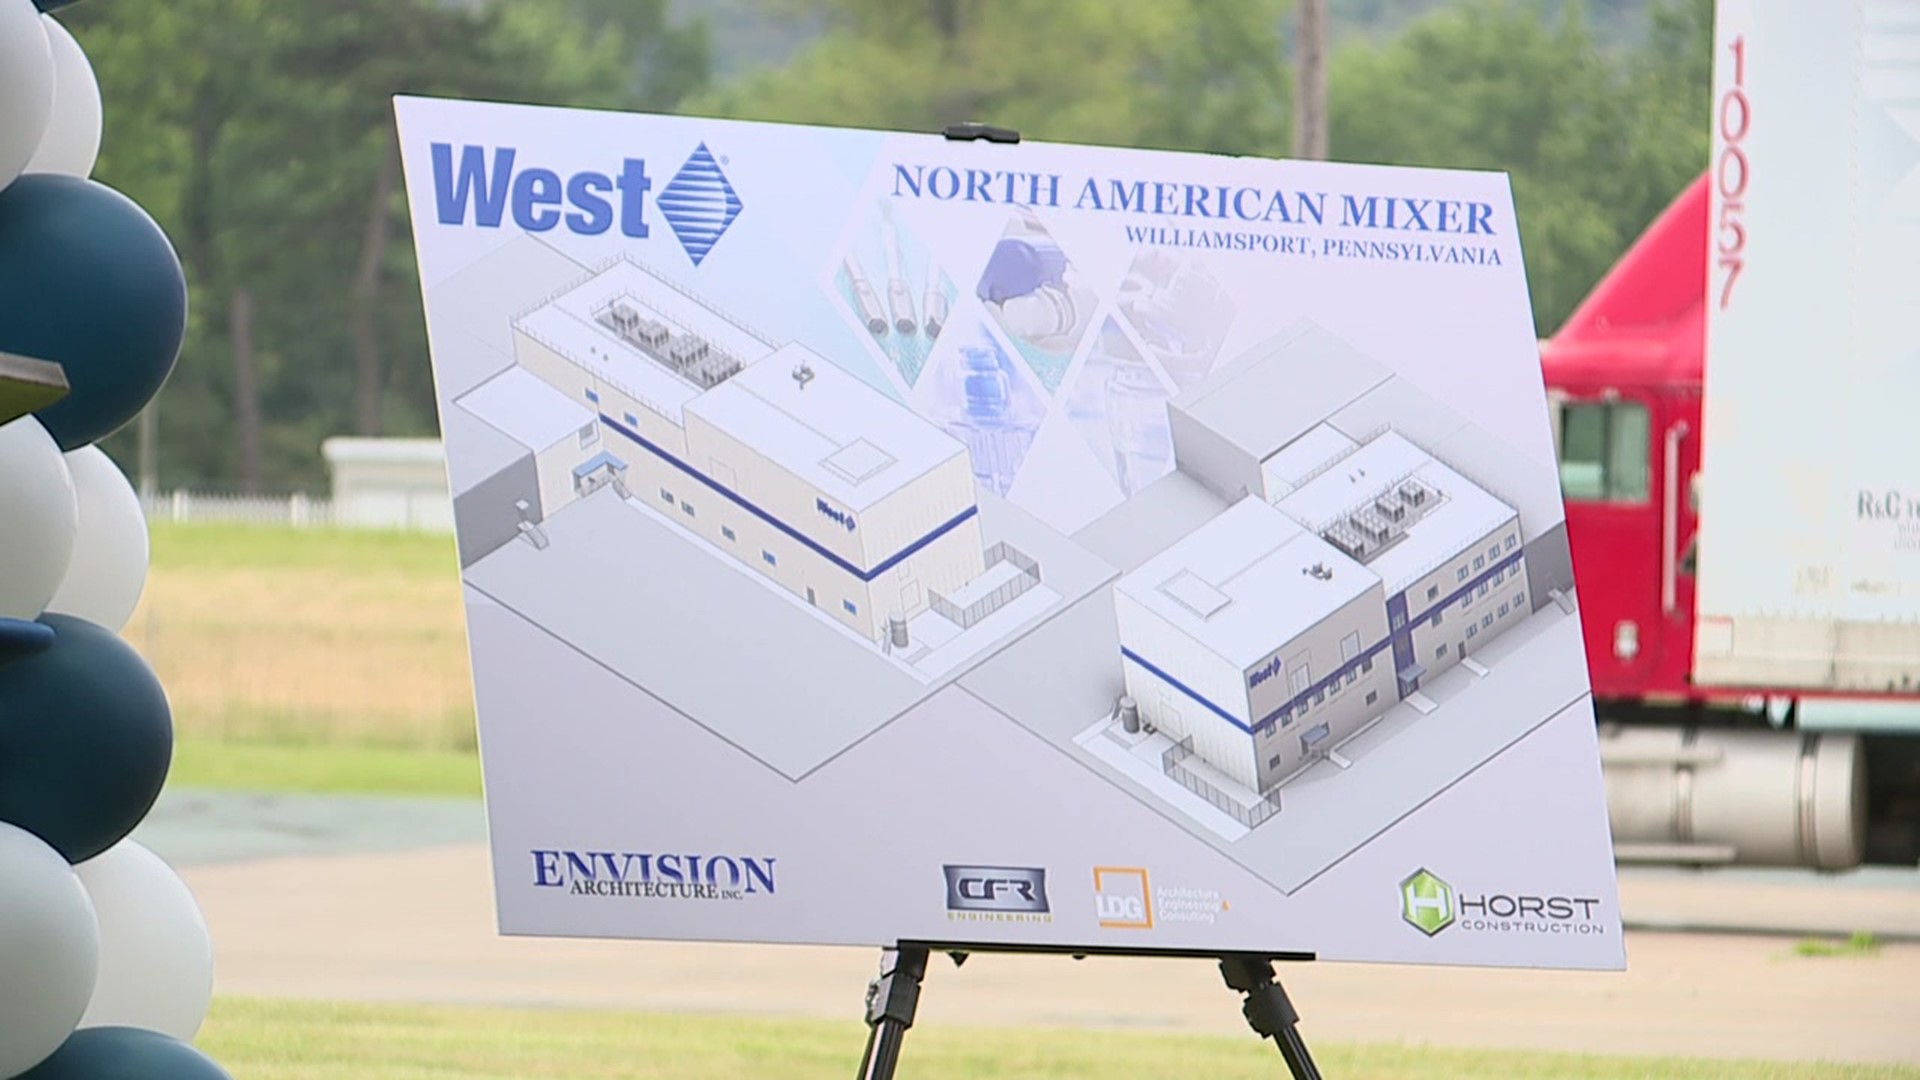 A groundbreaking ceremony was held for West Pharmaceutical Services' new 37,000-square-foot manufacturing building.